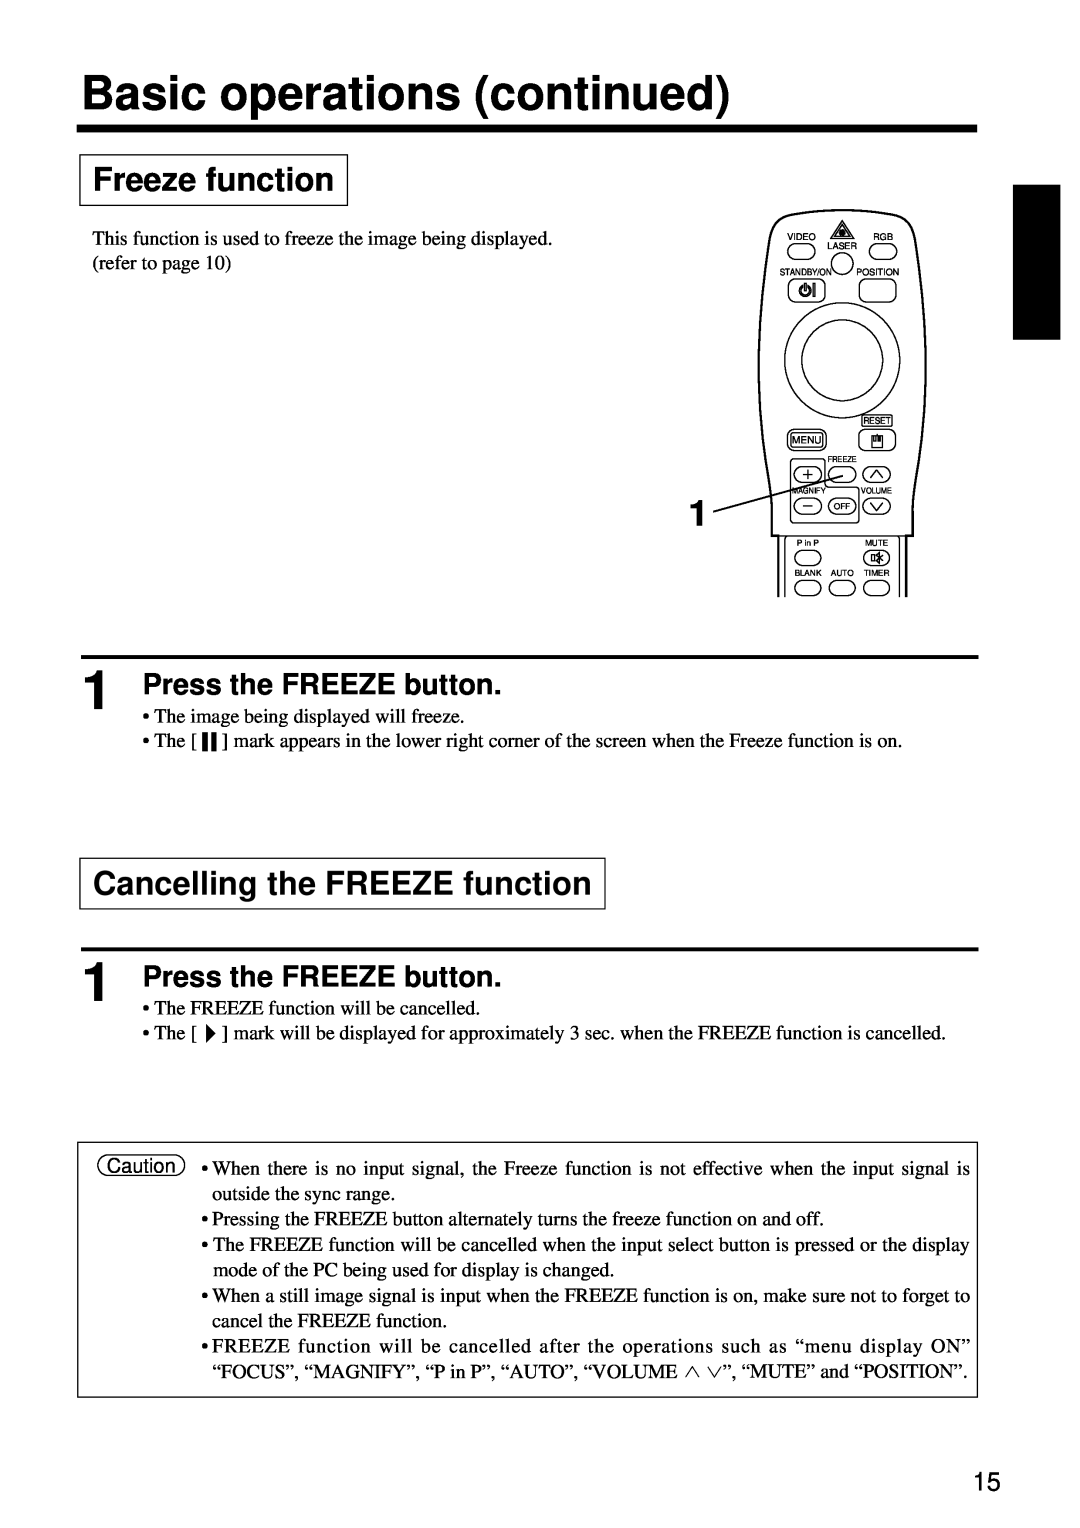 Hitachi CP-X960W Freeze function, Cancelling the FREEZE function, Press the FREEZE button, Basic operations continued 